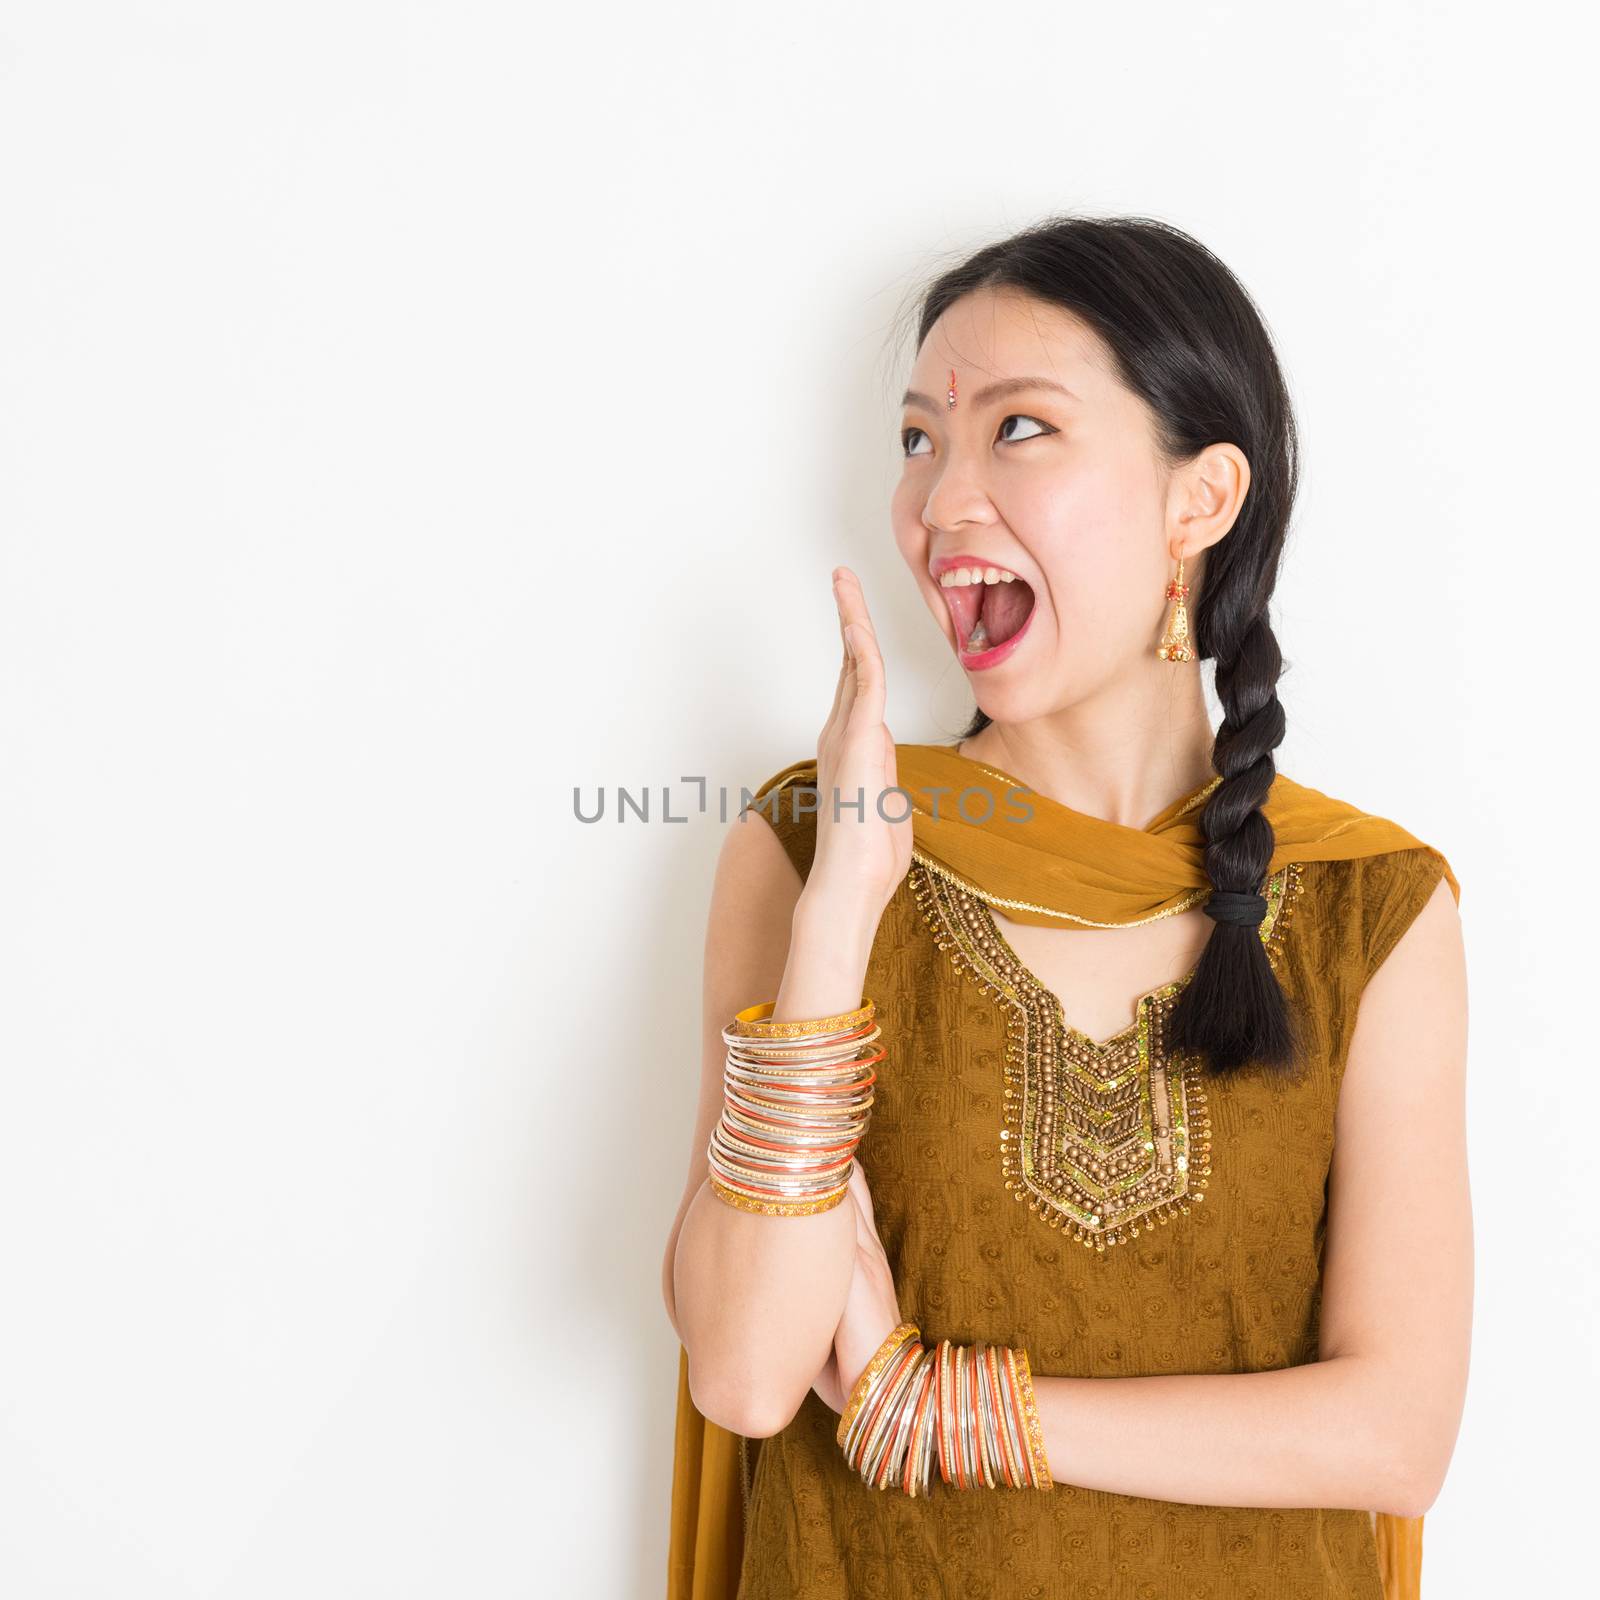 Mixed race Indian woman getting surprised by szefei